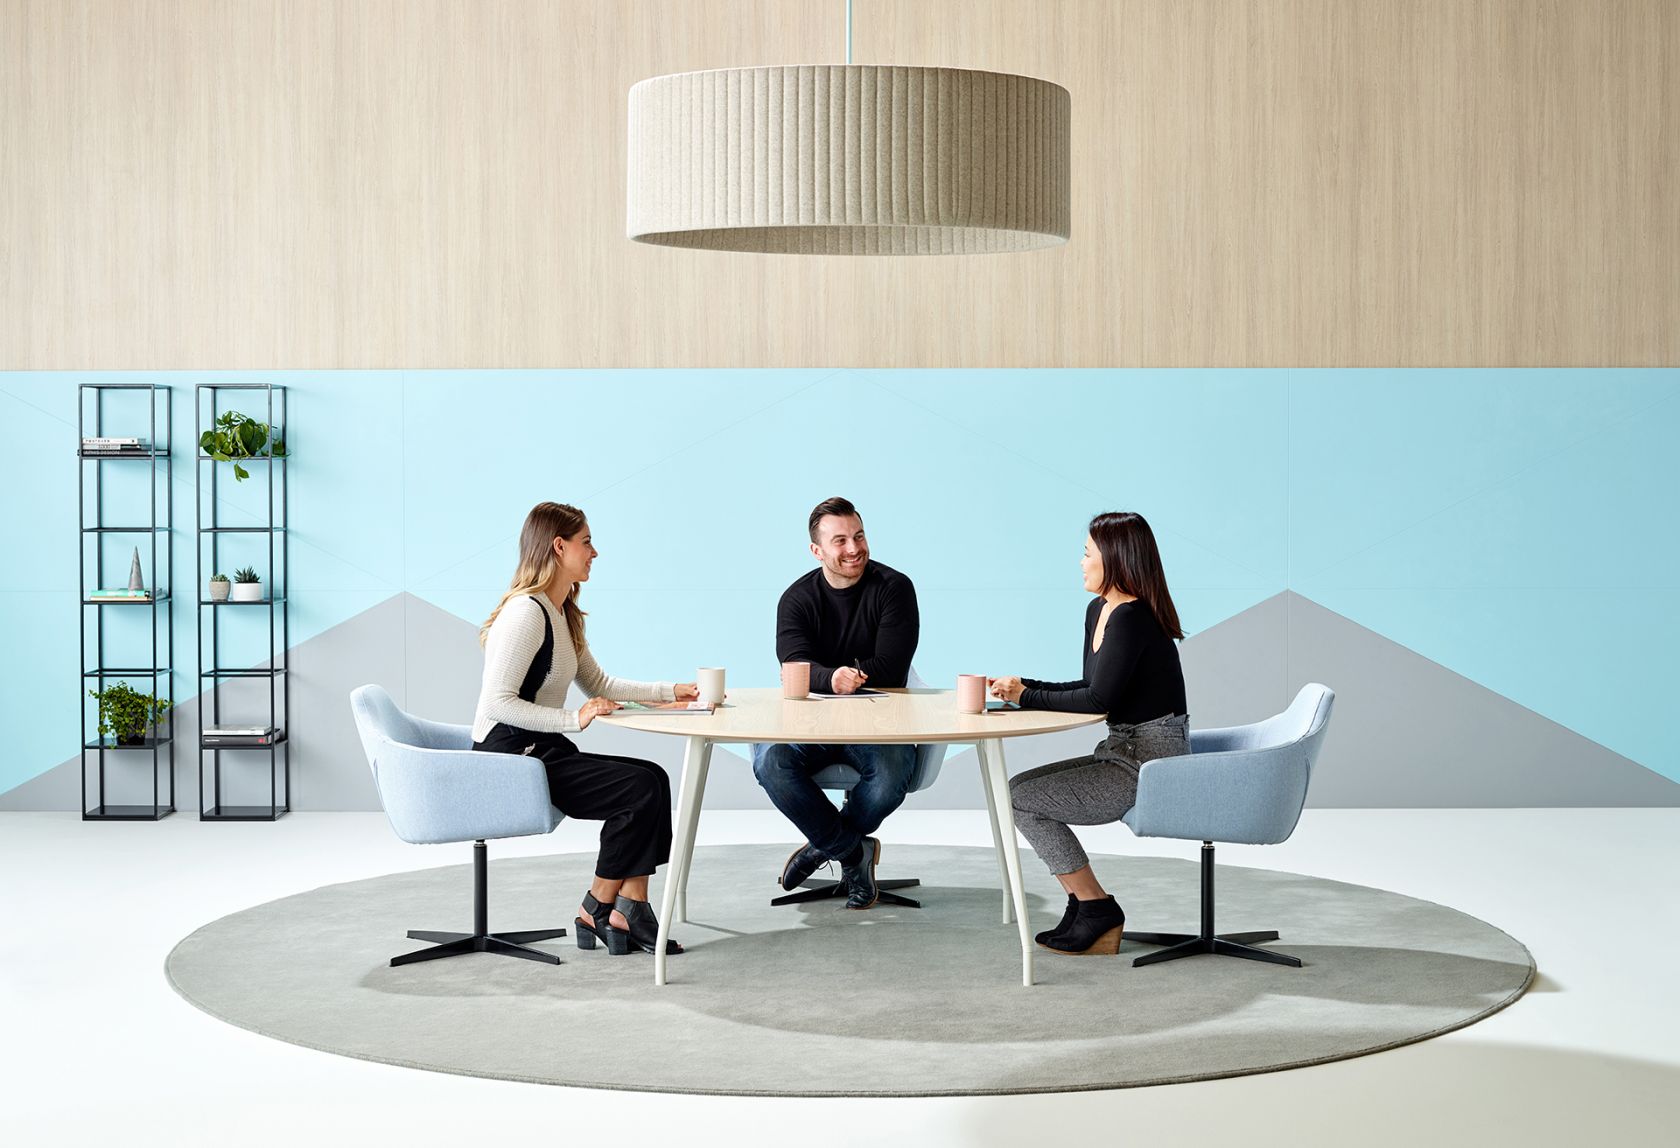 Aire Round Table, Baffle Light, Palomino Chair and Vertical Garden